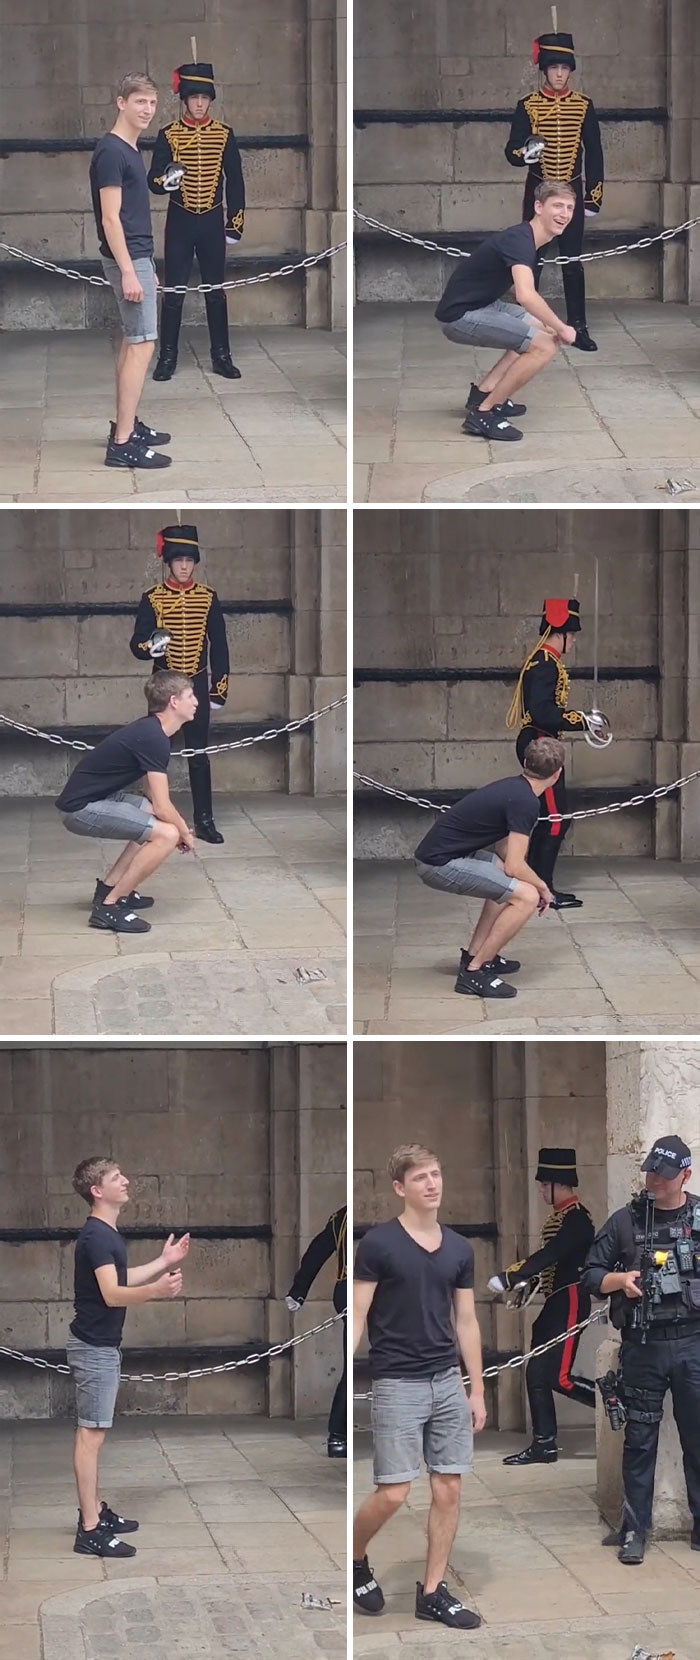 Tourist Told To Stop Being Disrespectful To The Queen's Guard By Armed Police